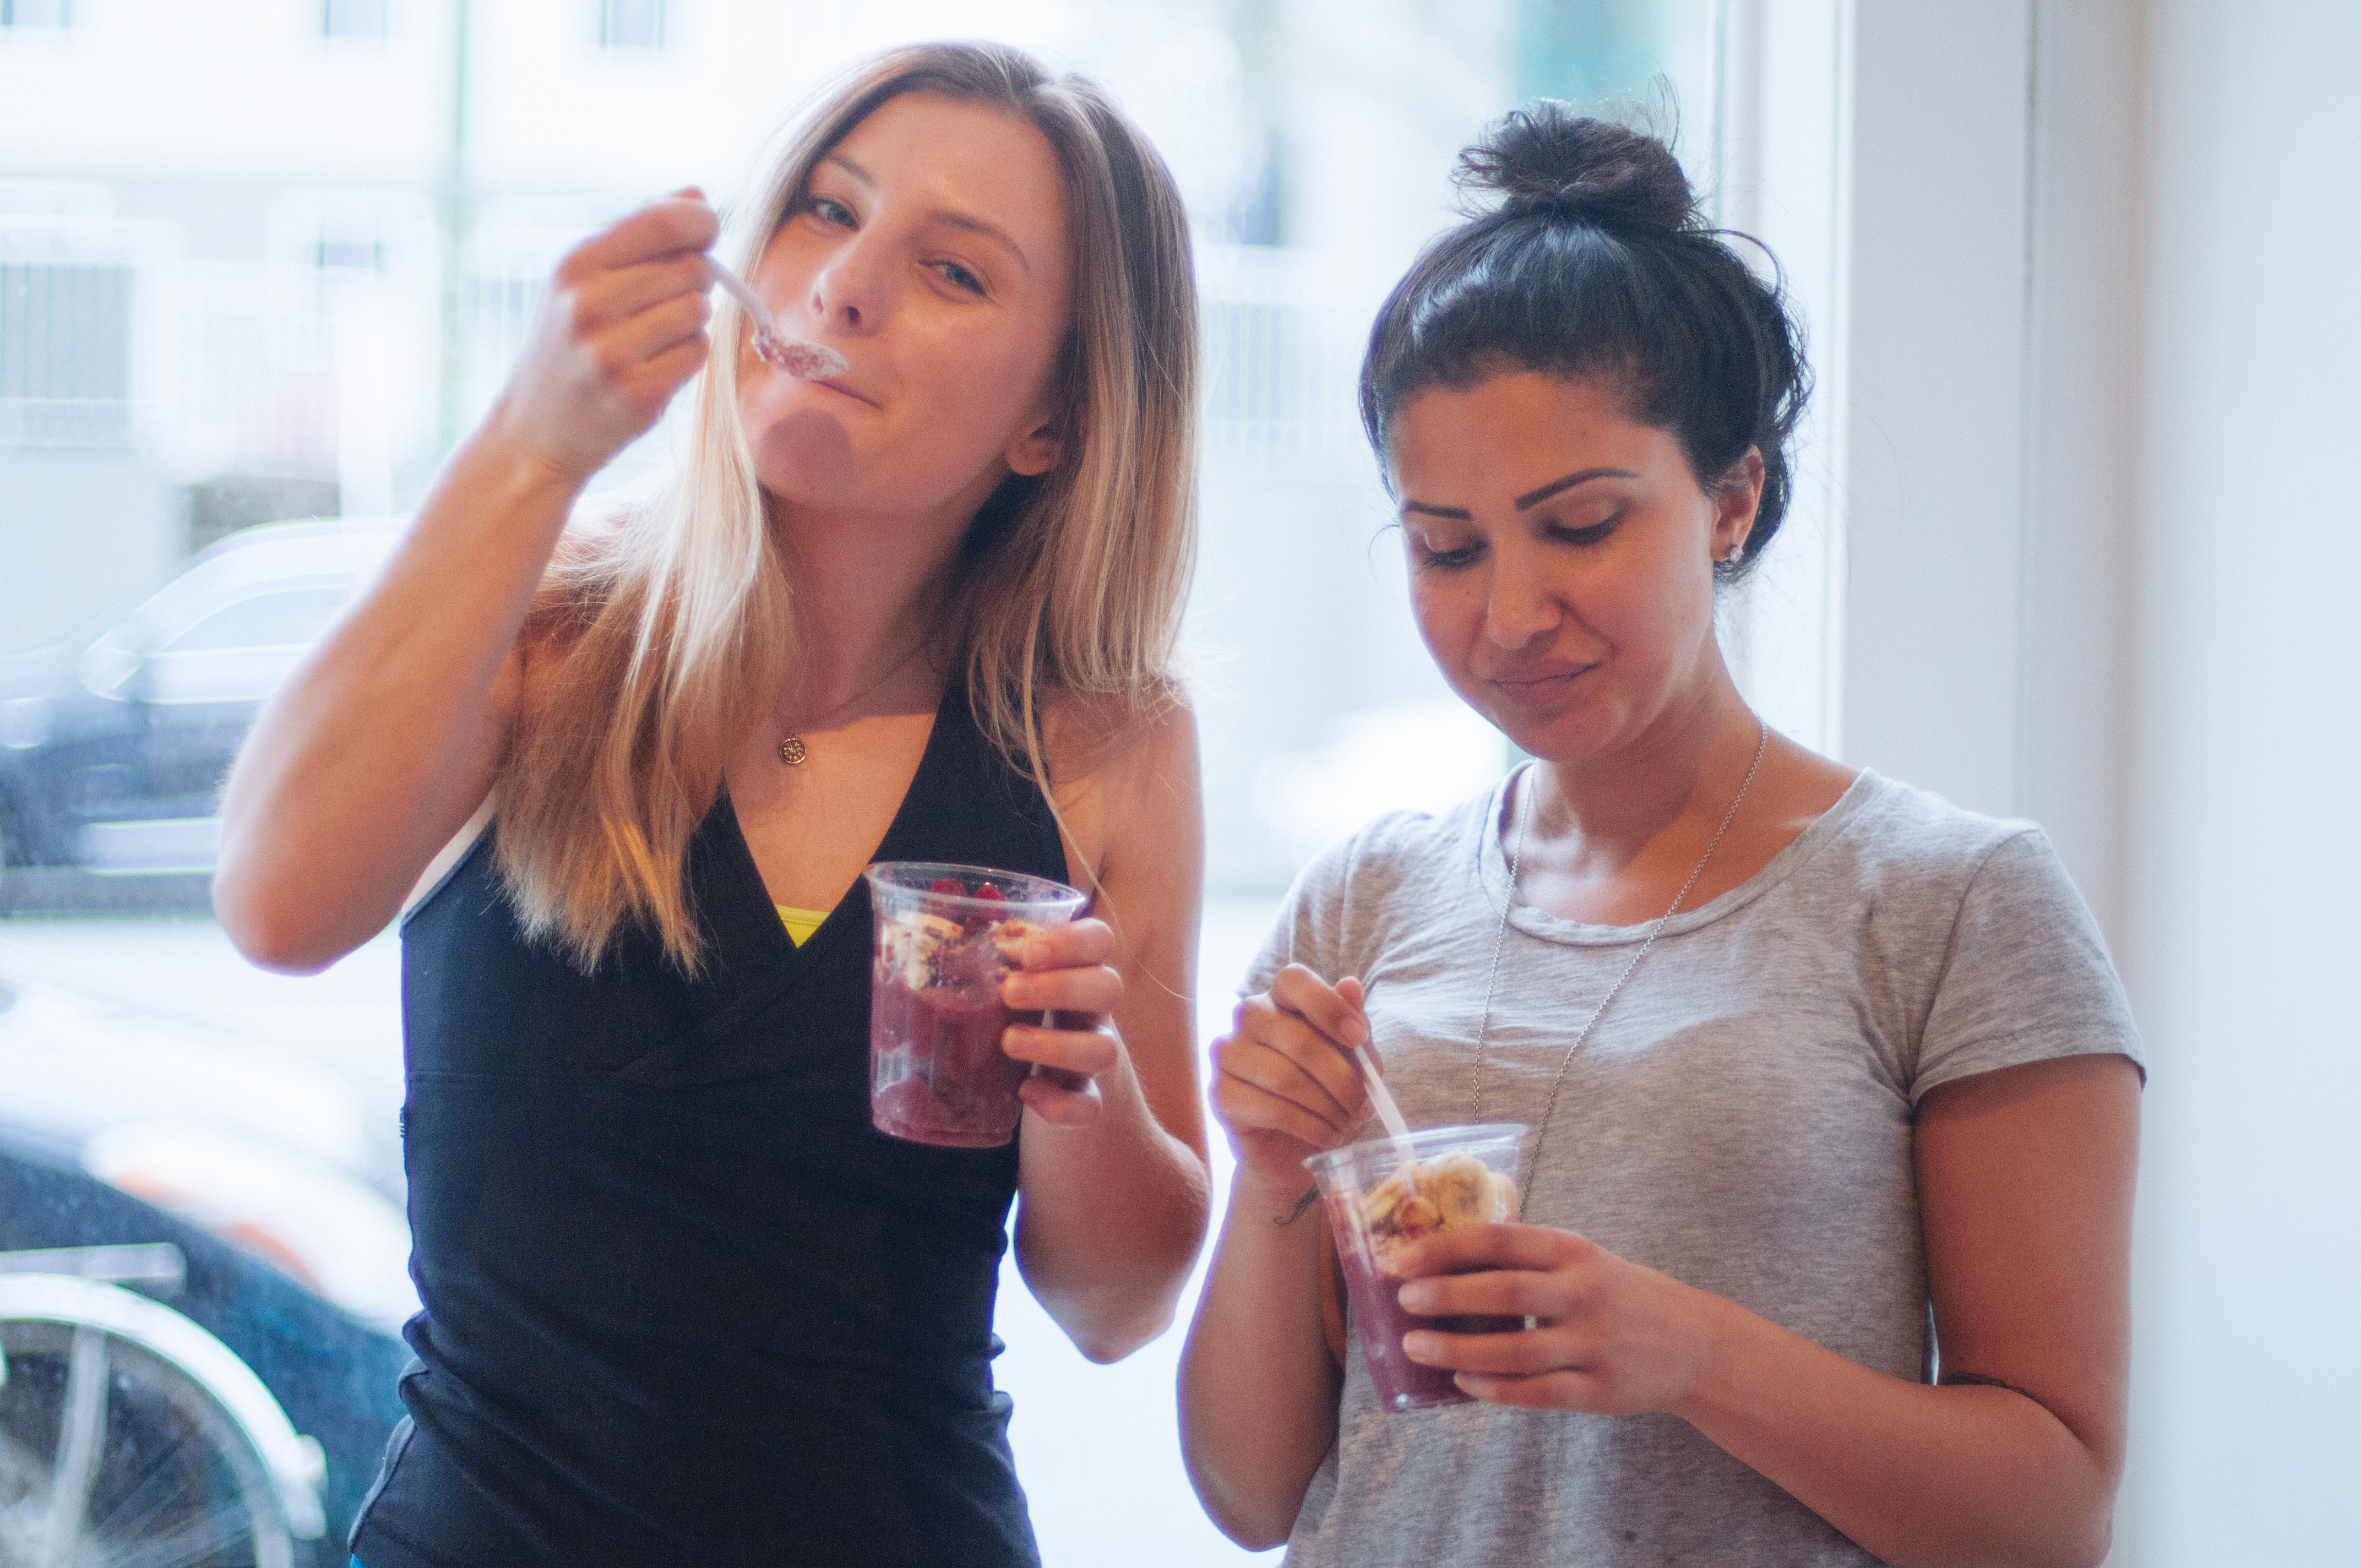 THE PURE LIFE Plant-Based Brunch & Yoga